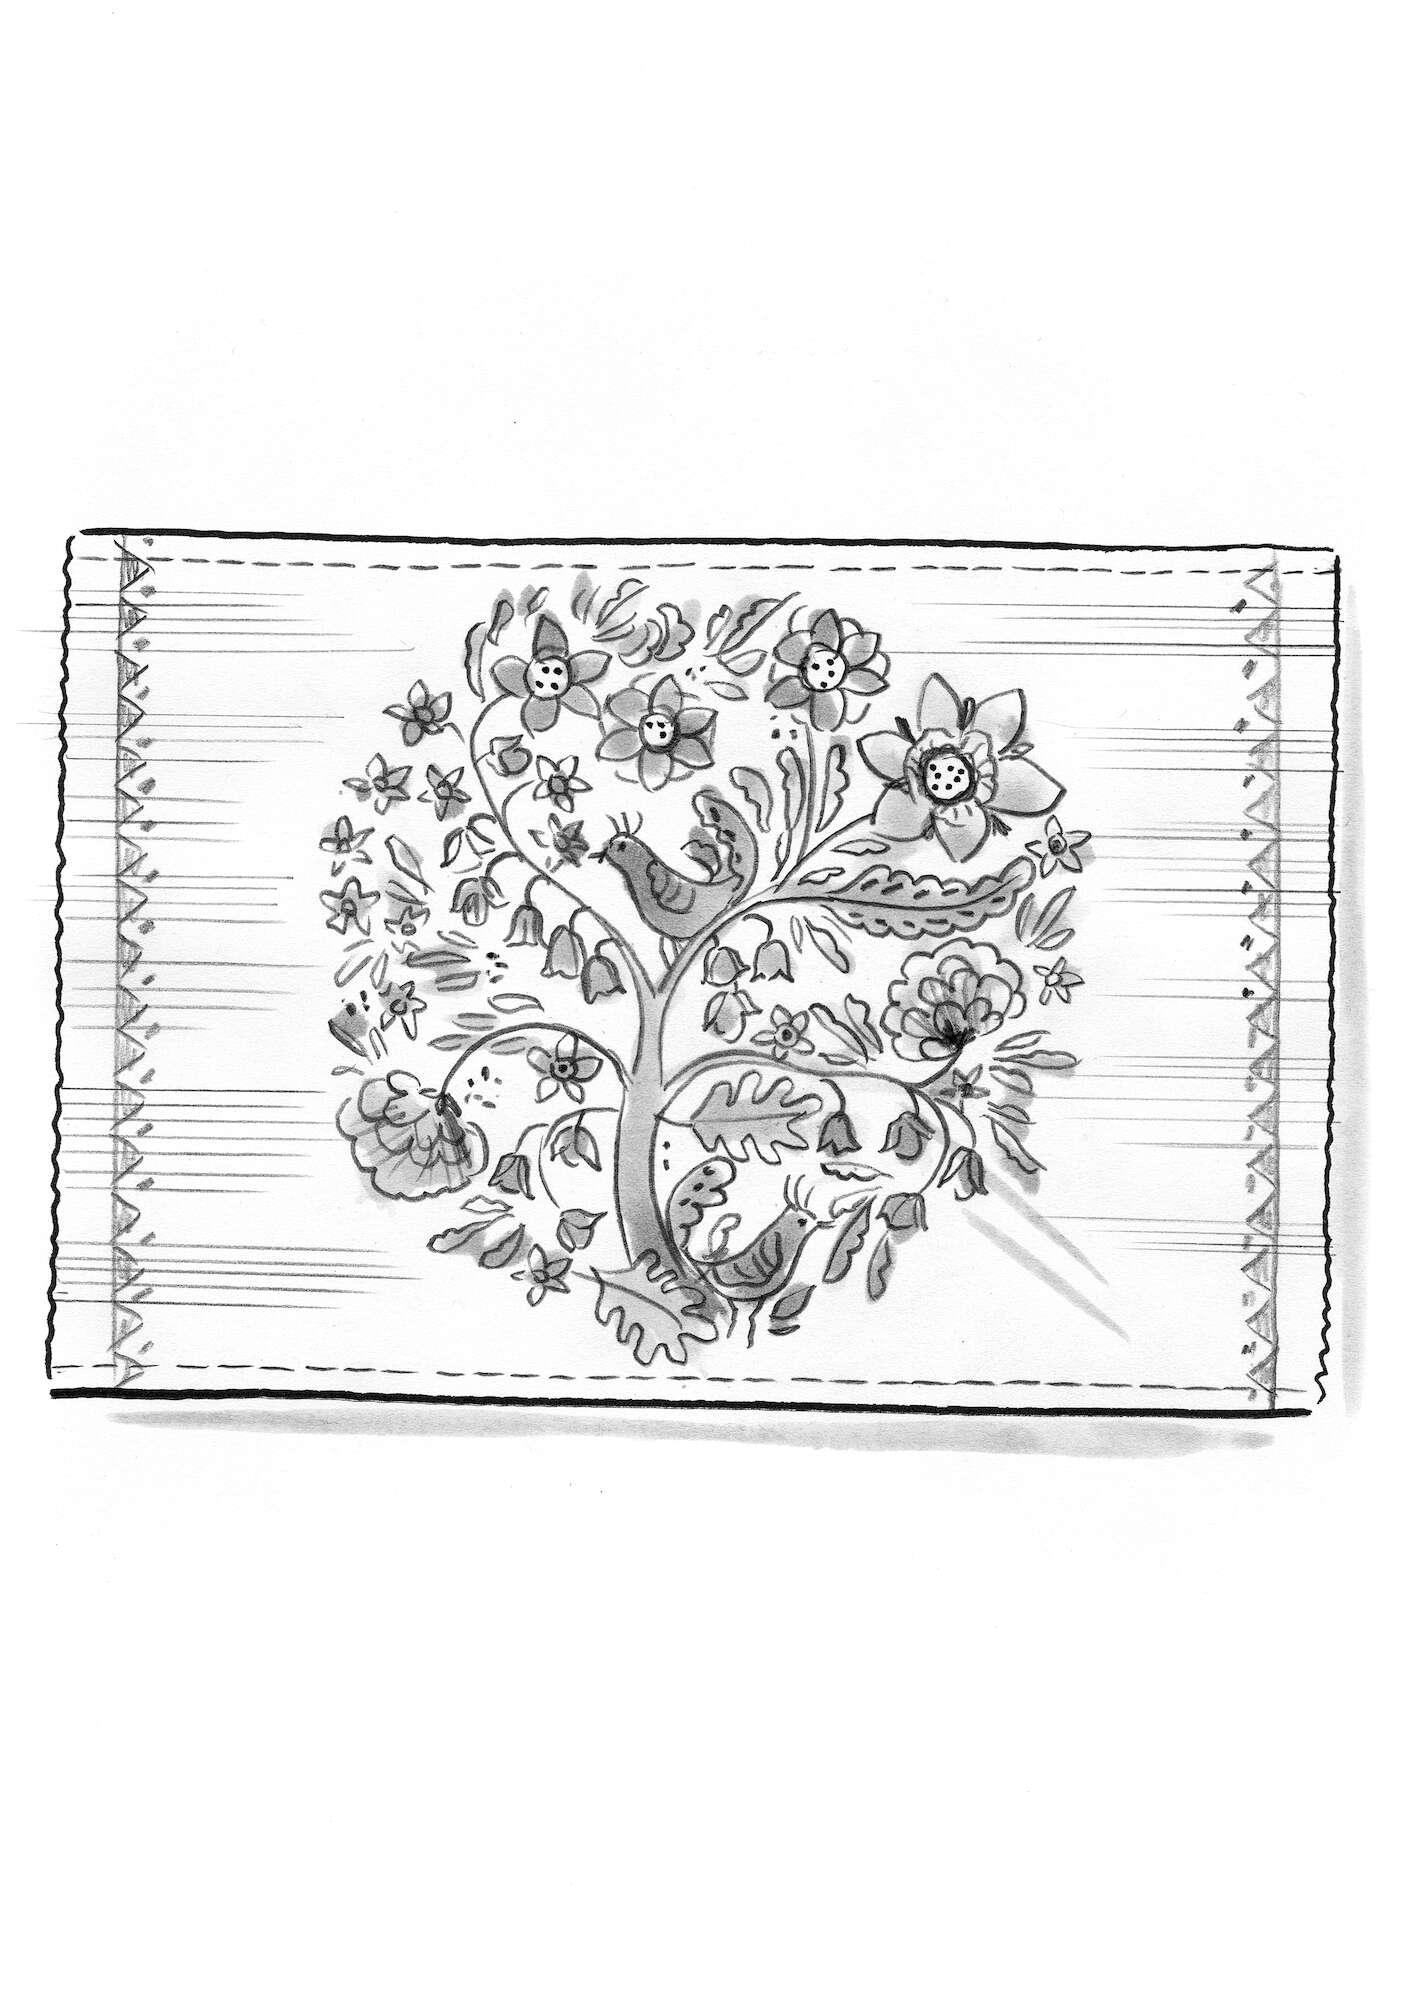 “Tree of Life” place mat in linen/cotton